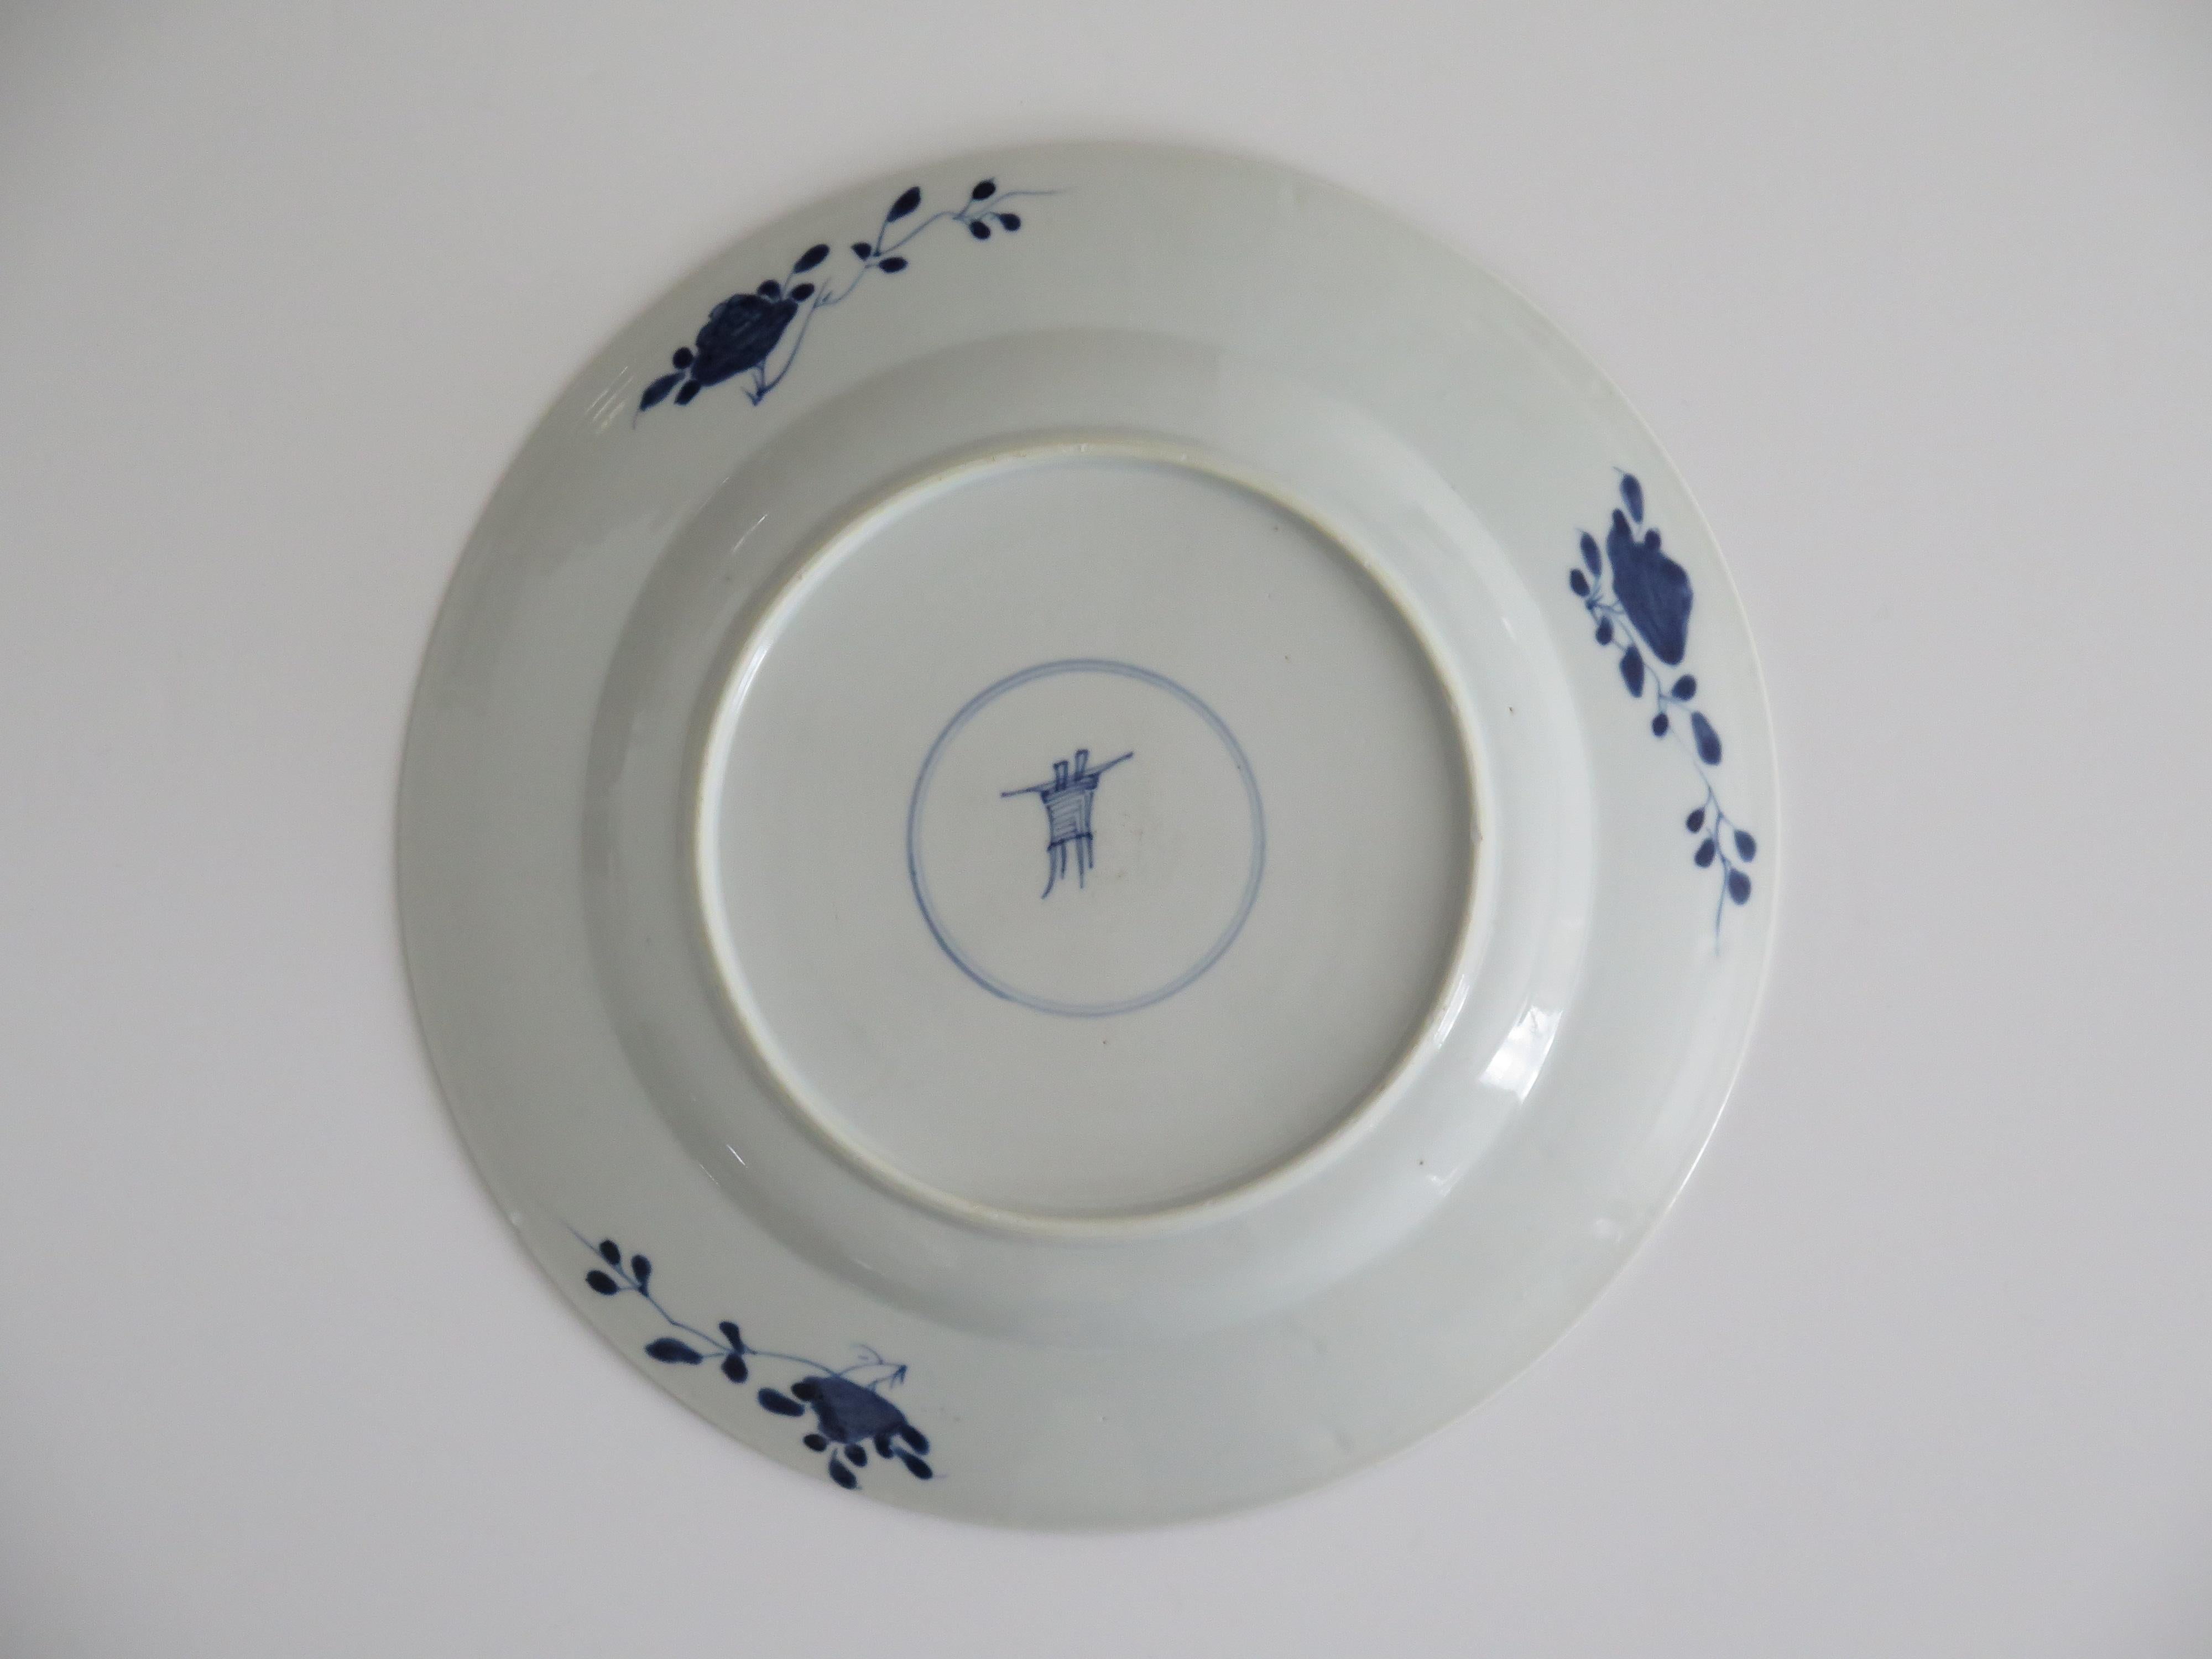 Kangxi Mark and period Chinese Large Plate Porcelain Blue & White, circa 1700 5